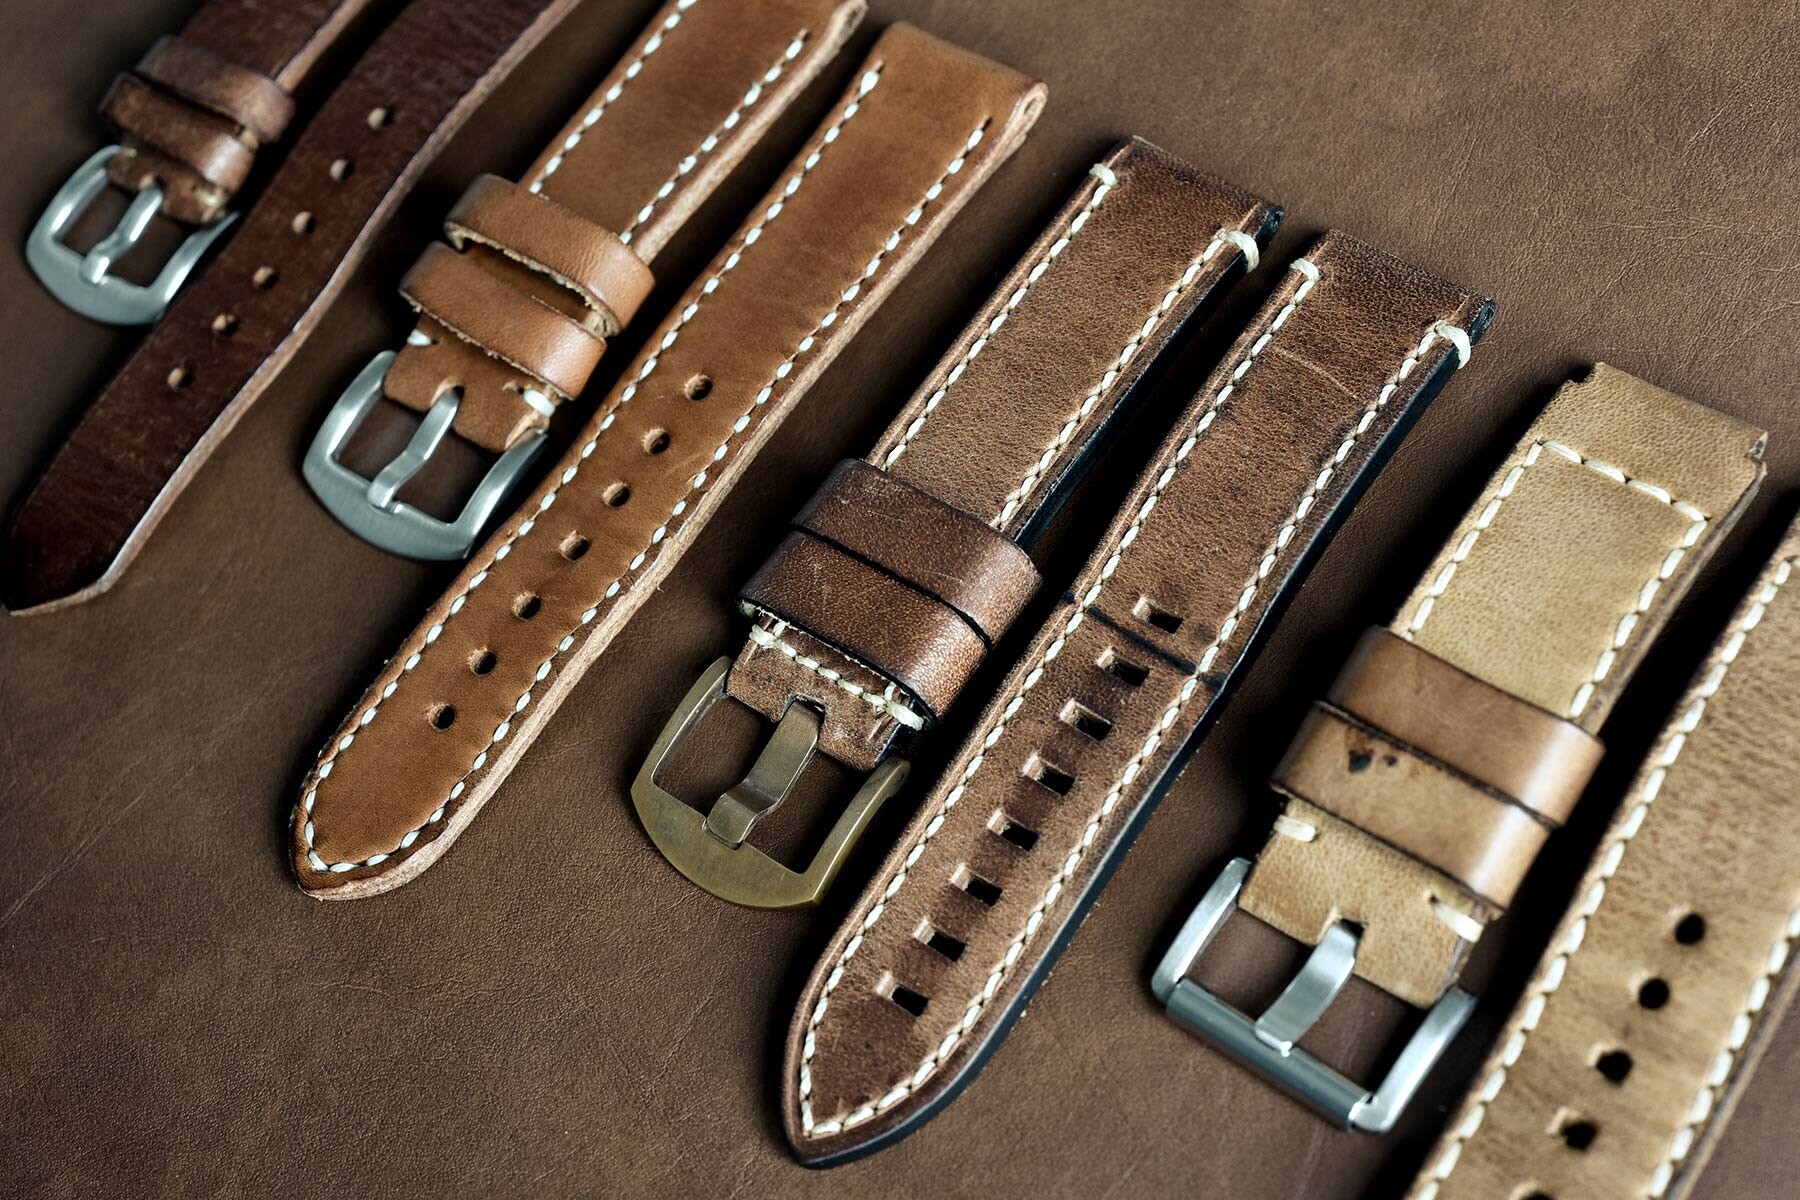 Leather watch straps lined up next to each other.